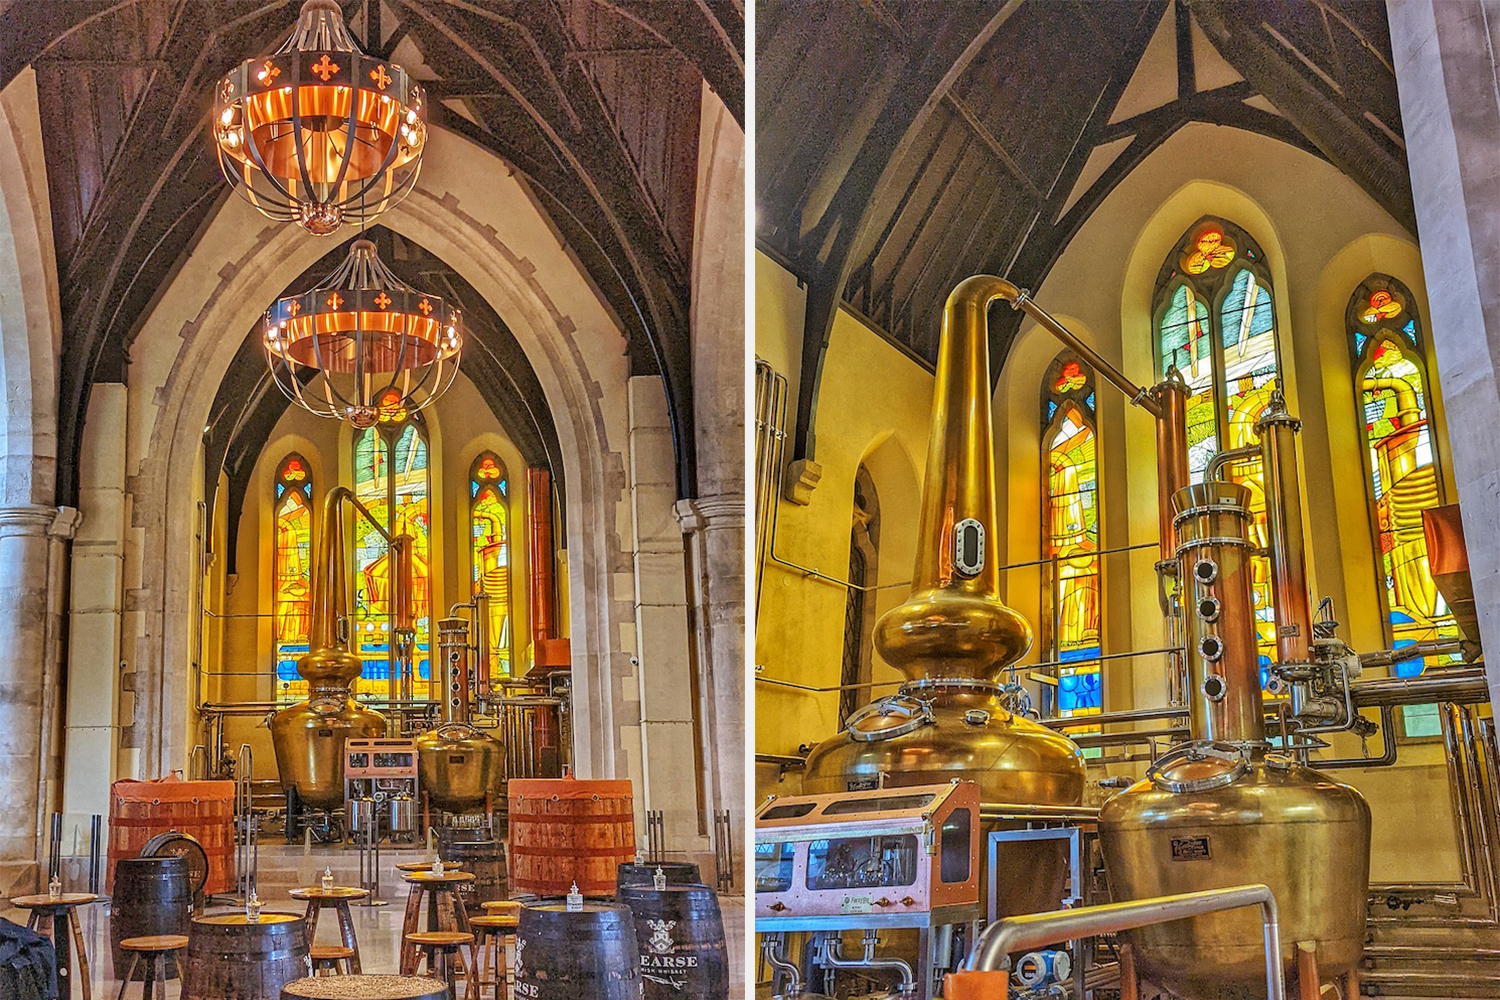 The stained glass windows behind the copper pot stills inside Pearse Lyons Distillery, which is located in the former St. James Church in Dublin, Ireland